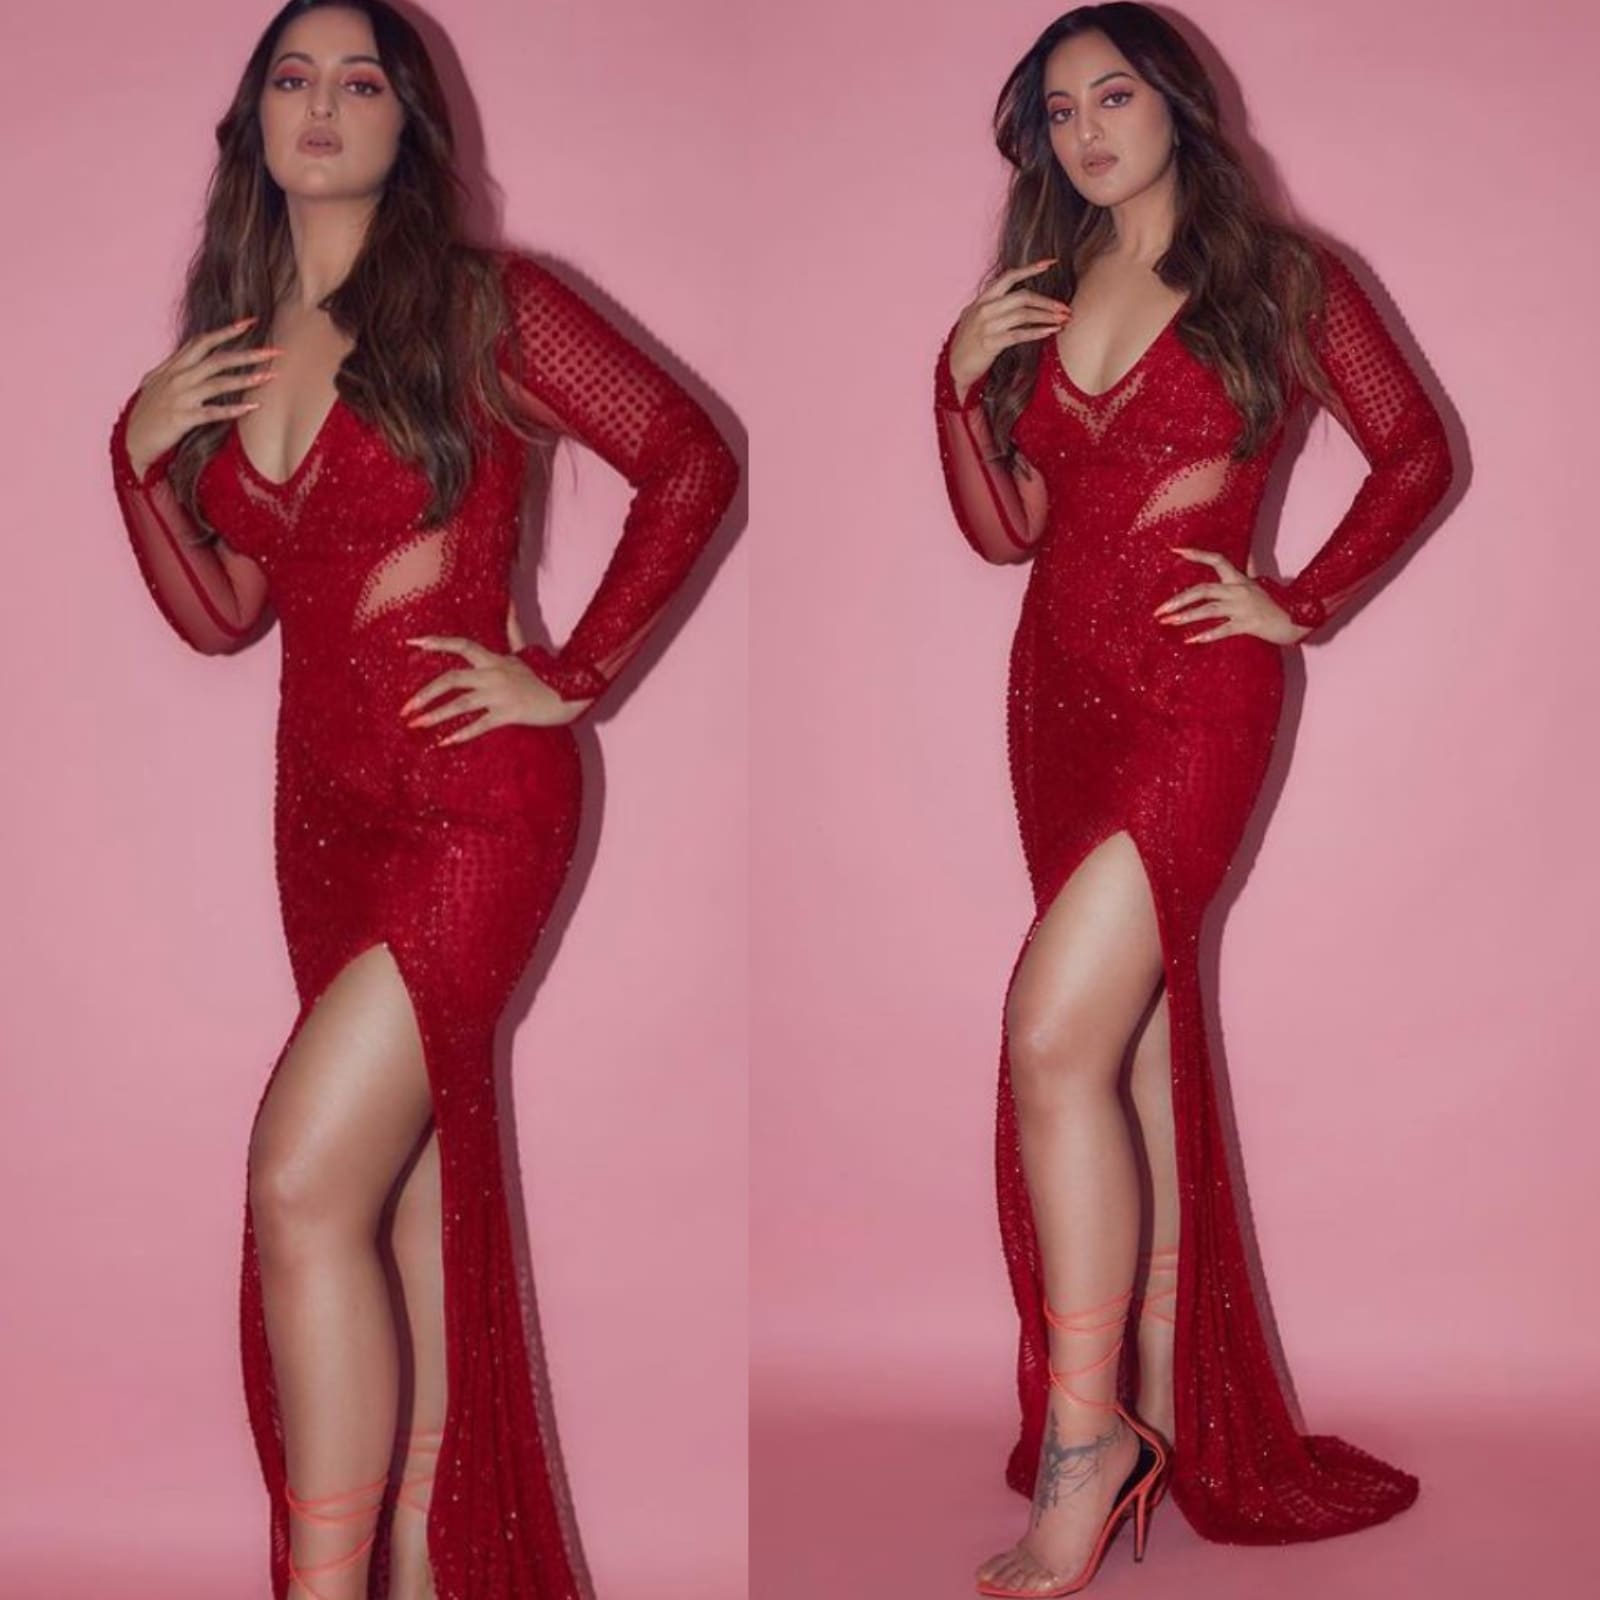 Sonakshi Sinha Beeg - Sonakshi Sinha Raises The Glam Quotient In A Red Thigh-High Slit Dress -  News18